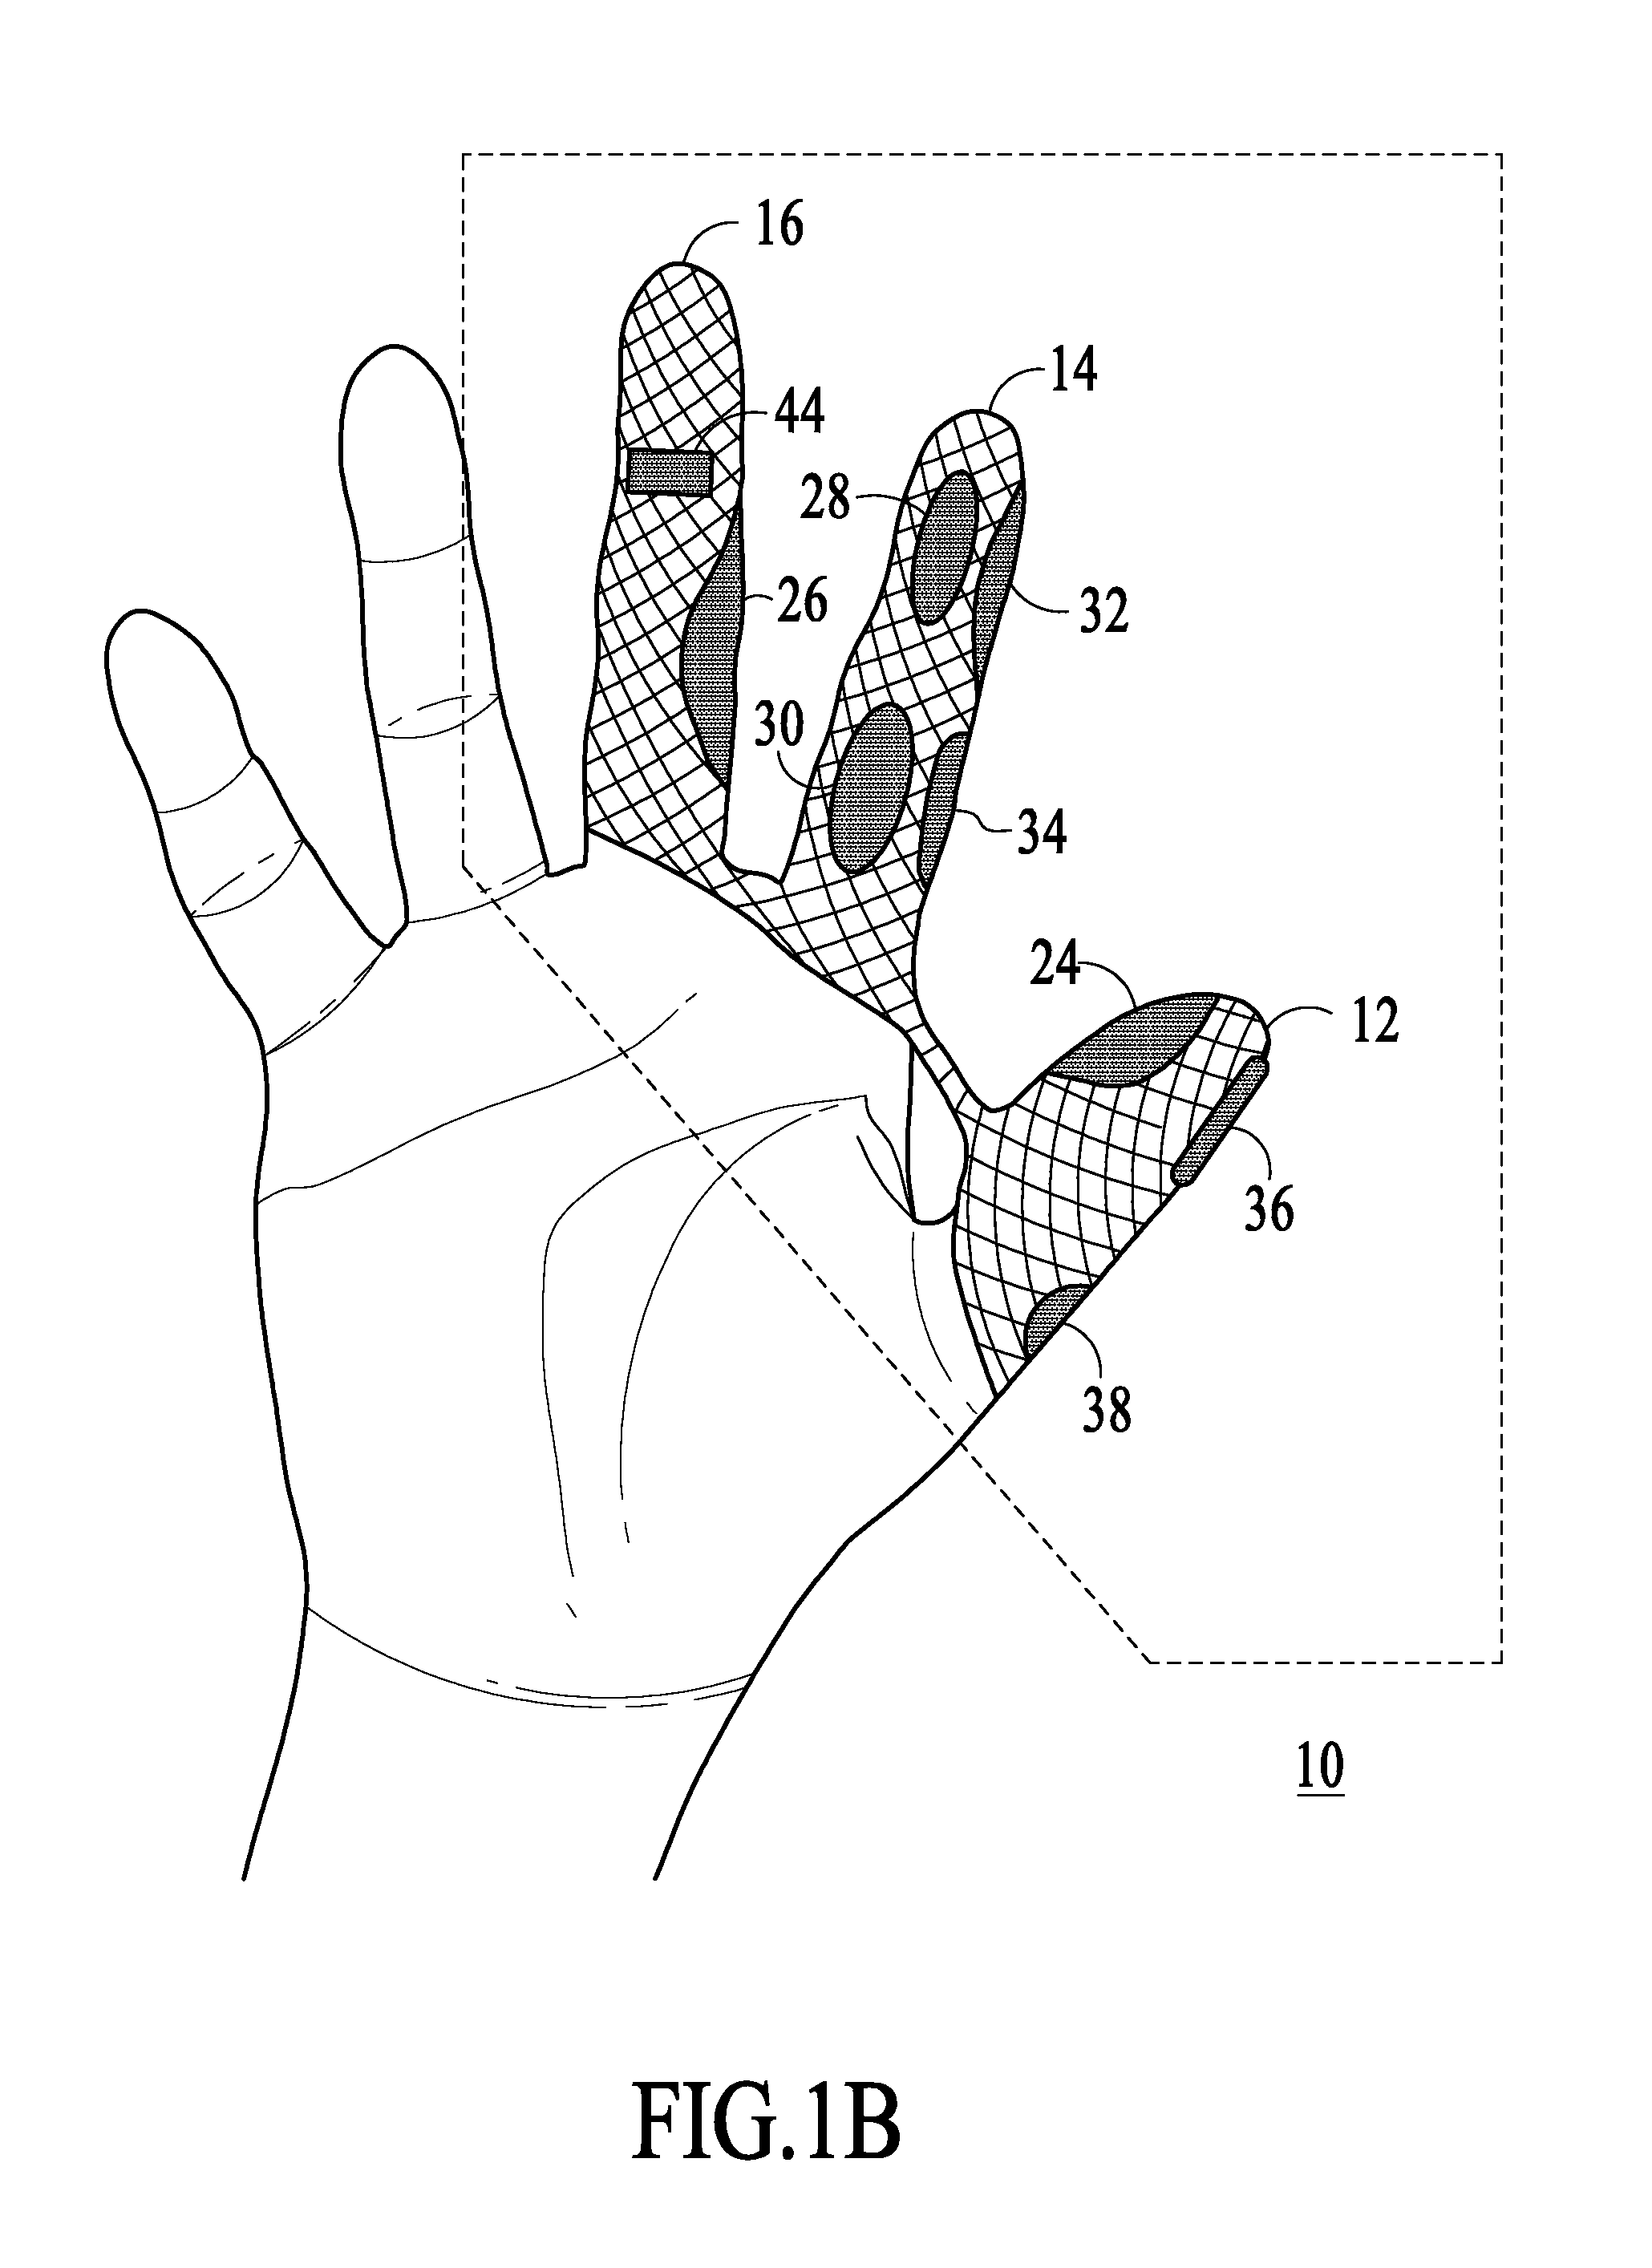 Apparatus for remotely controlling computers and other electronic appliances/devices using a combination of voice commands and finger movements